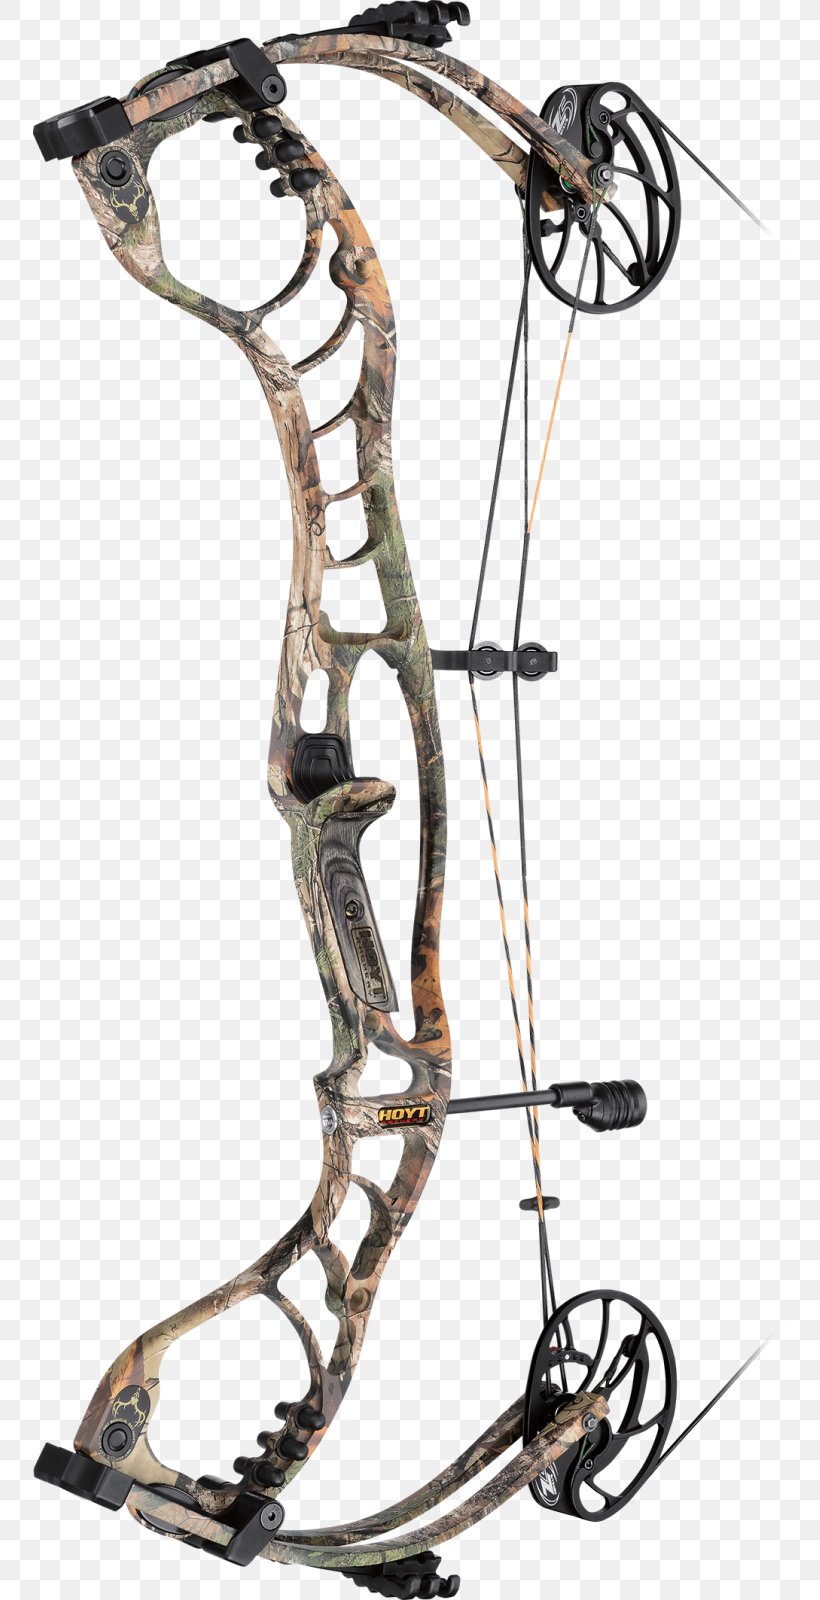 Compound Bows Bow And Arrow Bowhunting Archery, PNG, 753x1600px, Compound Bows, Archery, Bow, Bow And Arrow, Bowhunting Download Free